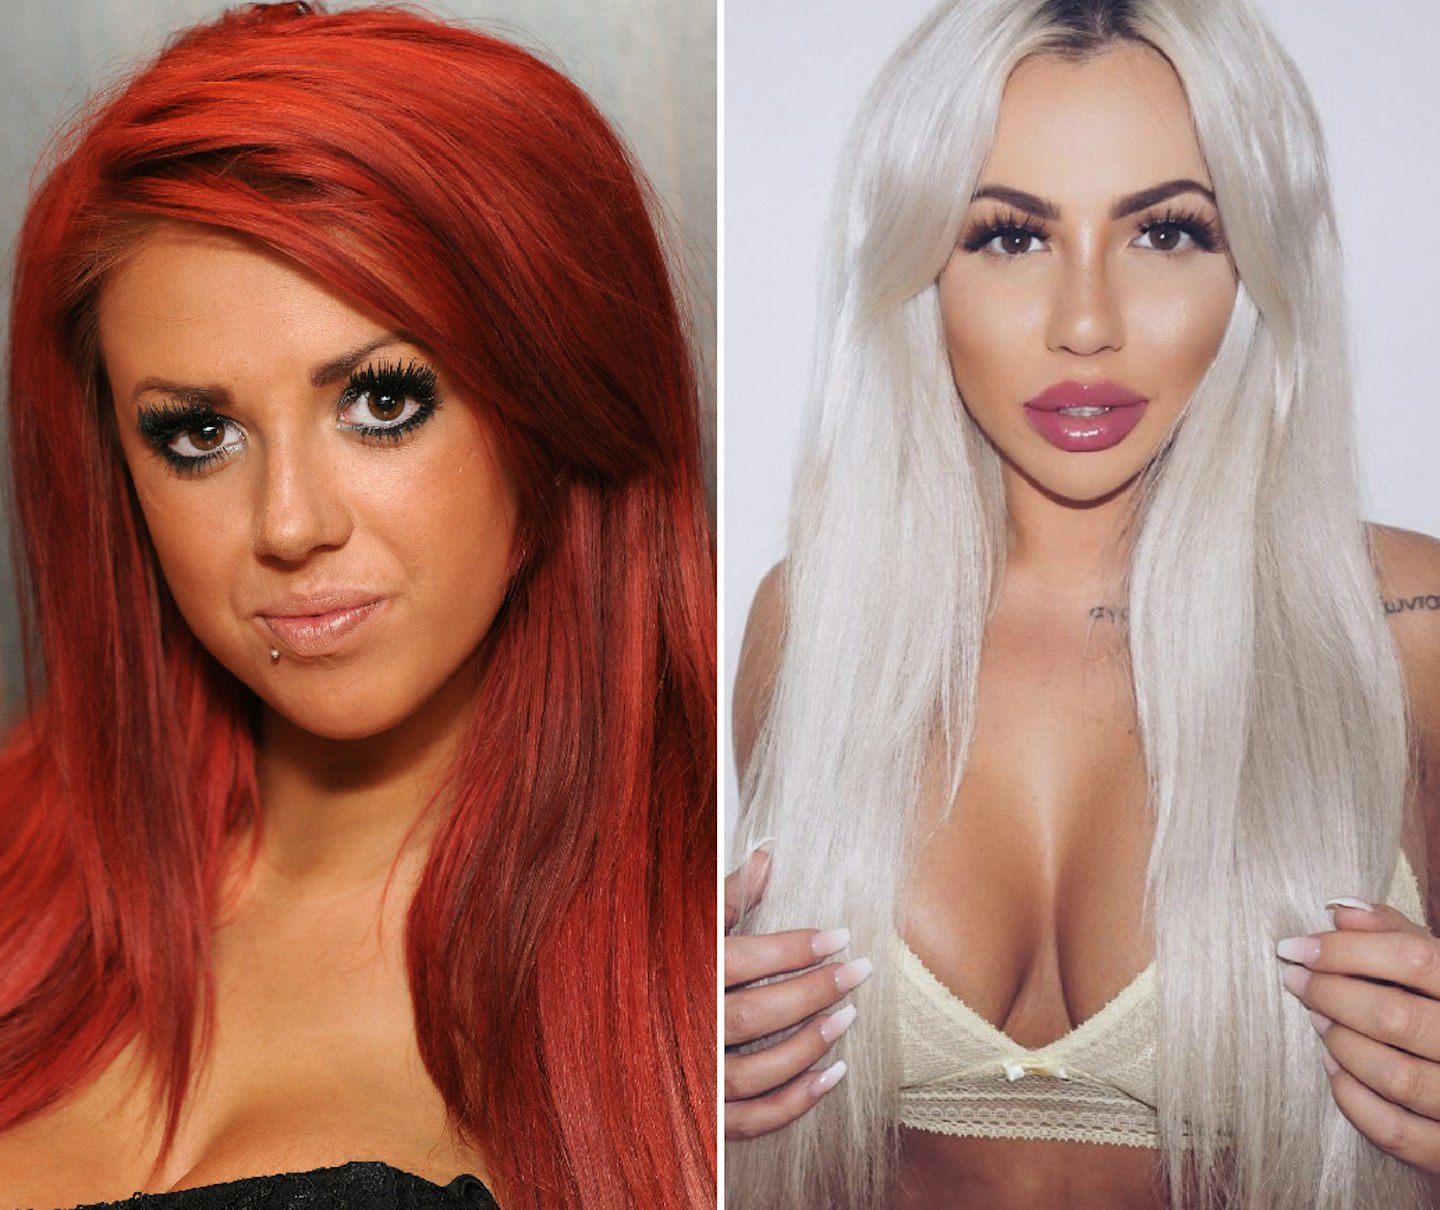 Holly Hagan before and after plastic surgery